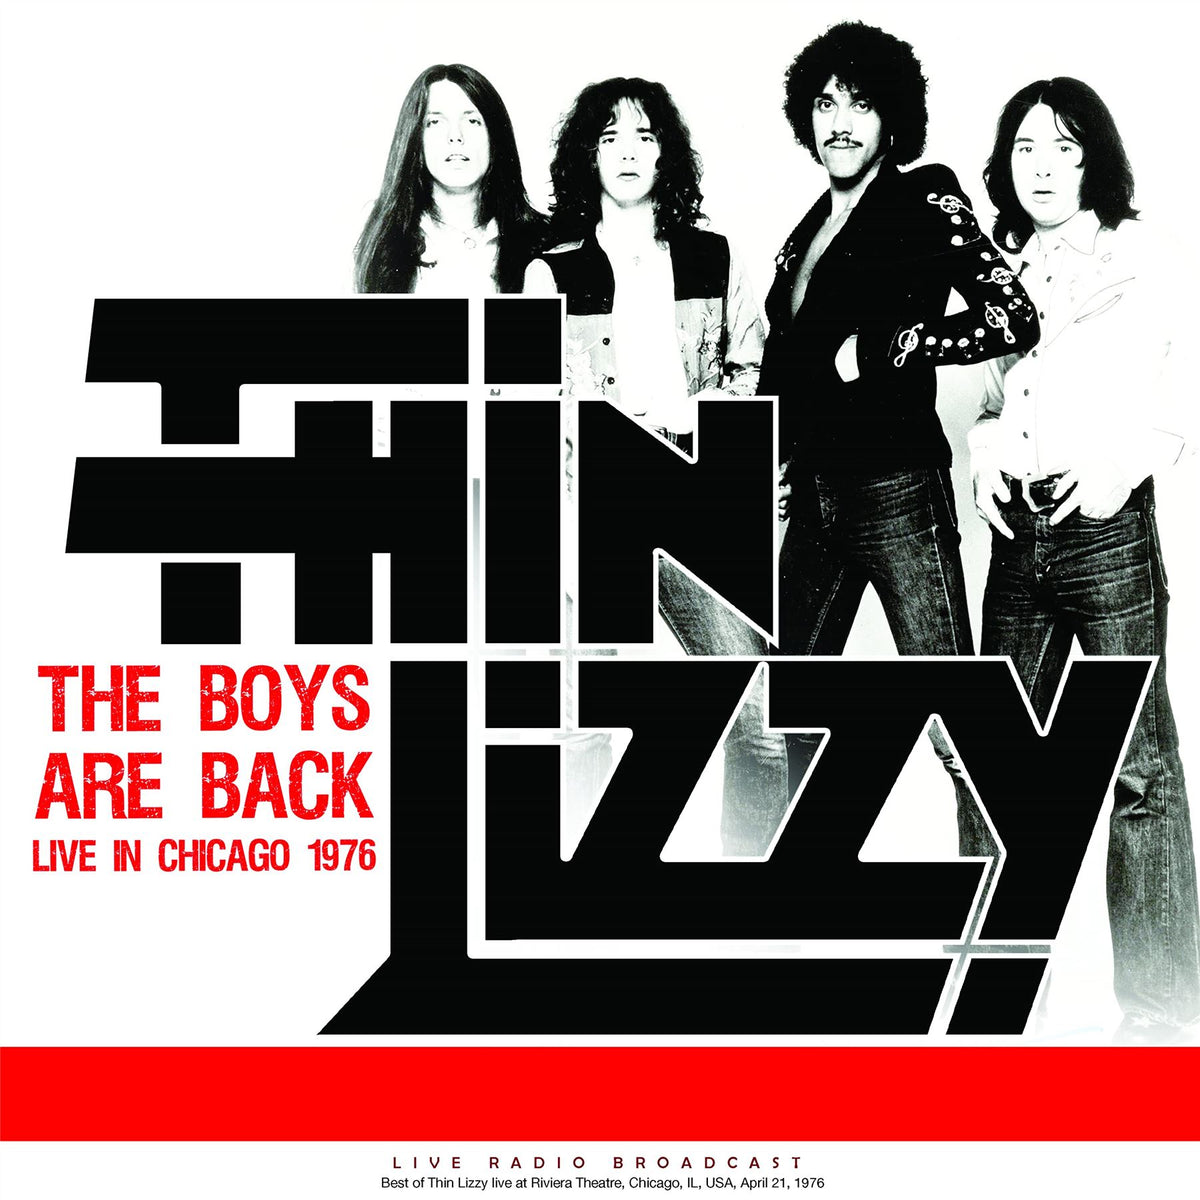 Thin Lizzy - The Boys Are Back Live In Chicago 1976 - Vinyl